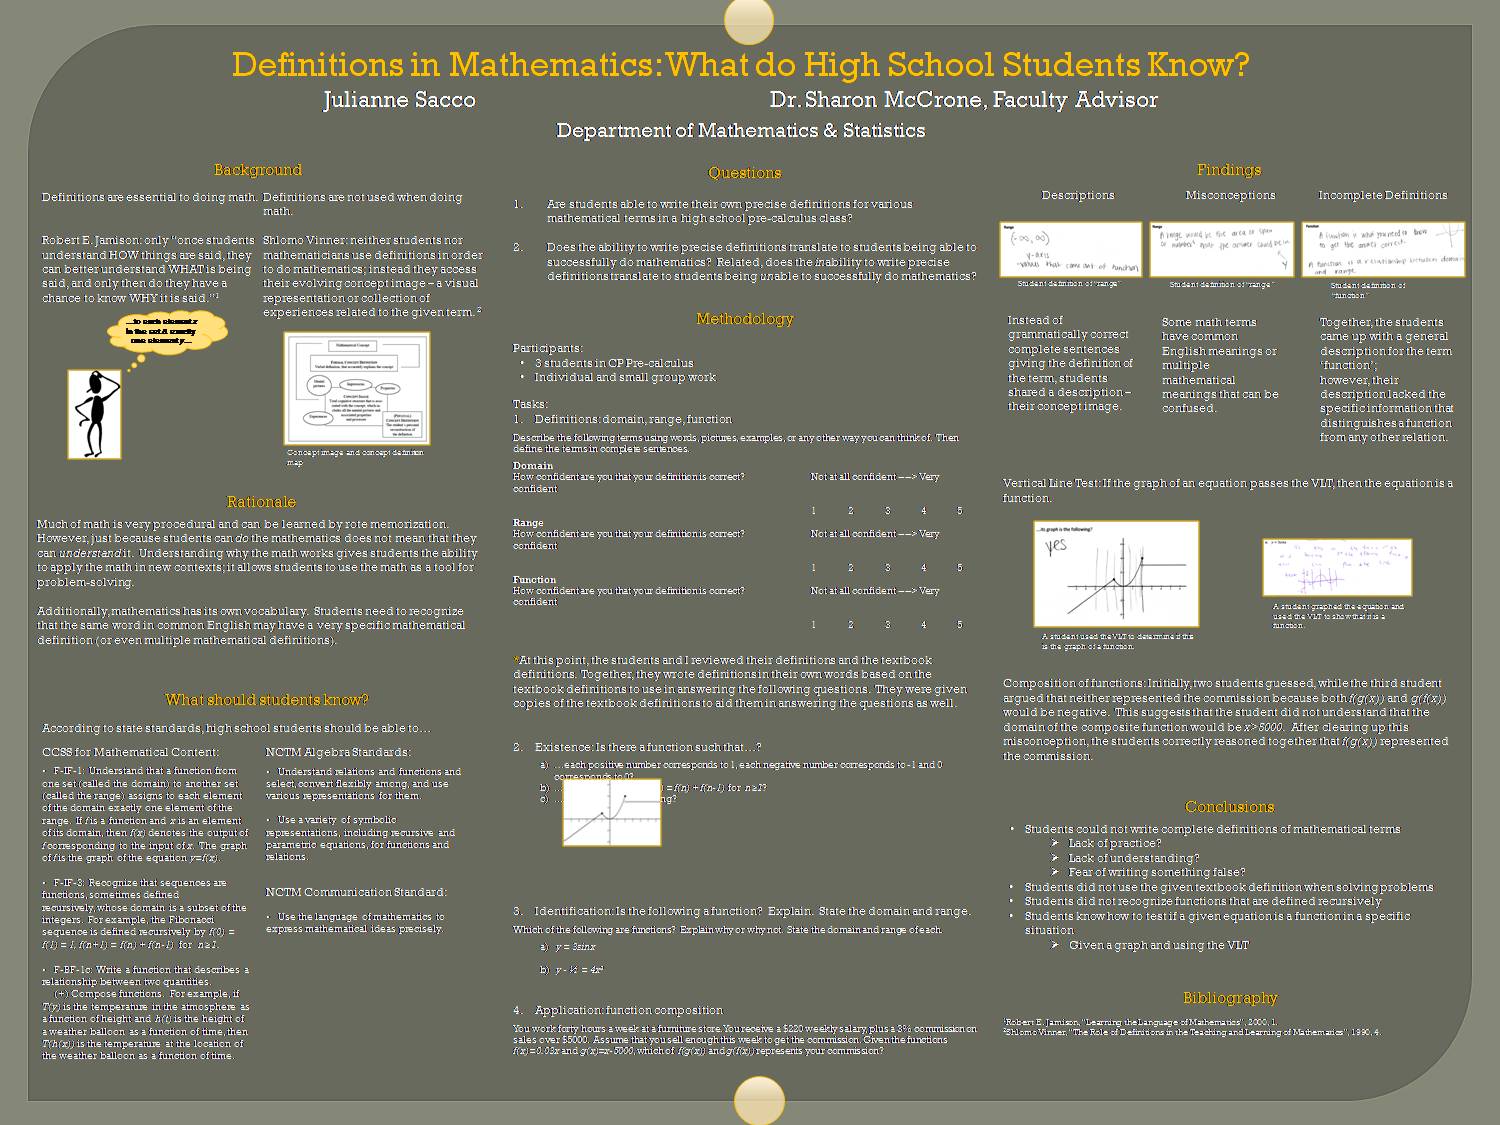 Definitions In Mathematics: What Do High School Students Know? by jmn597